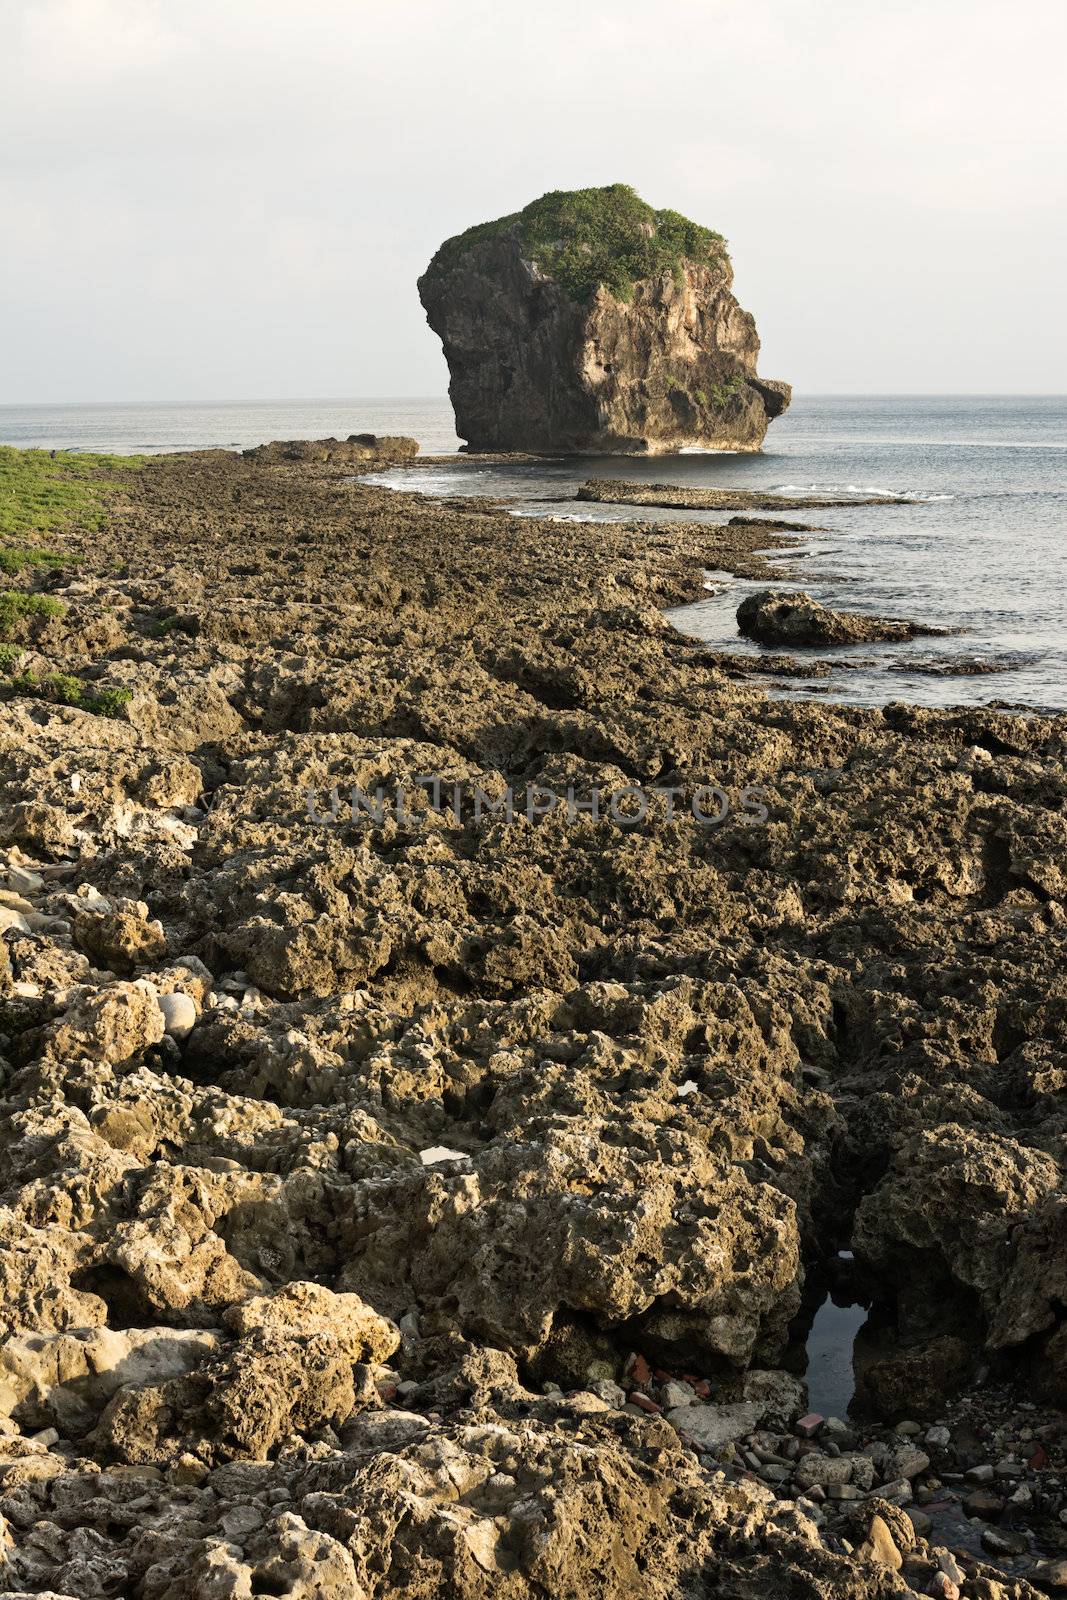 Chuanfan Rock, famous coral coastline and landmark at Kenting National Park, Taiwan, Asia.